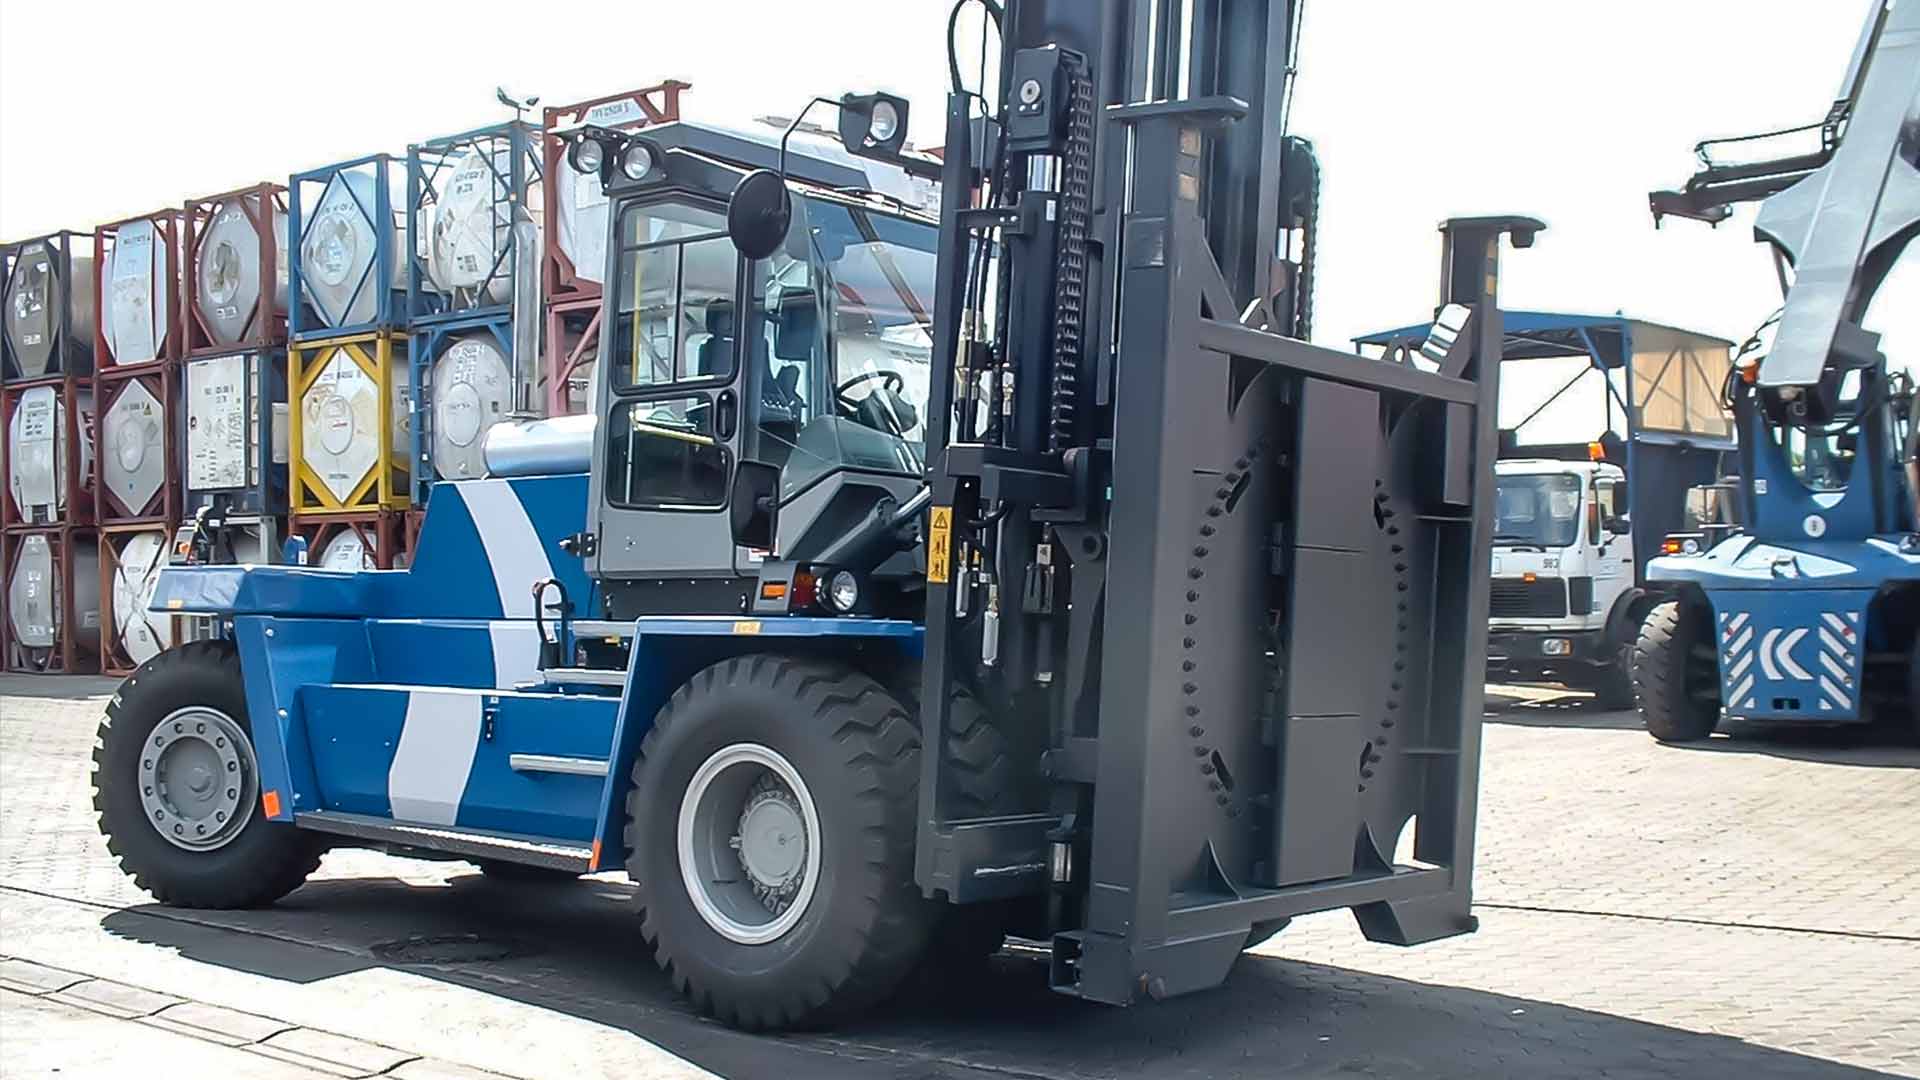 Blue forklift truck with flat rotating attachment in front of stacked containers